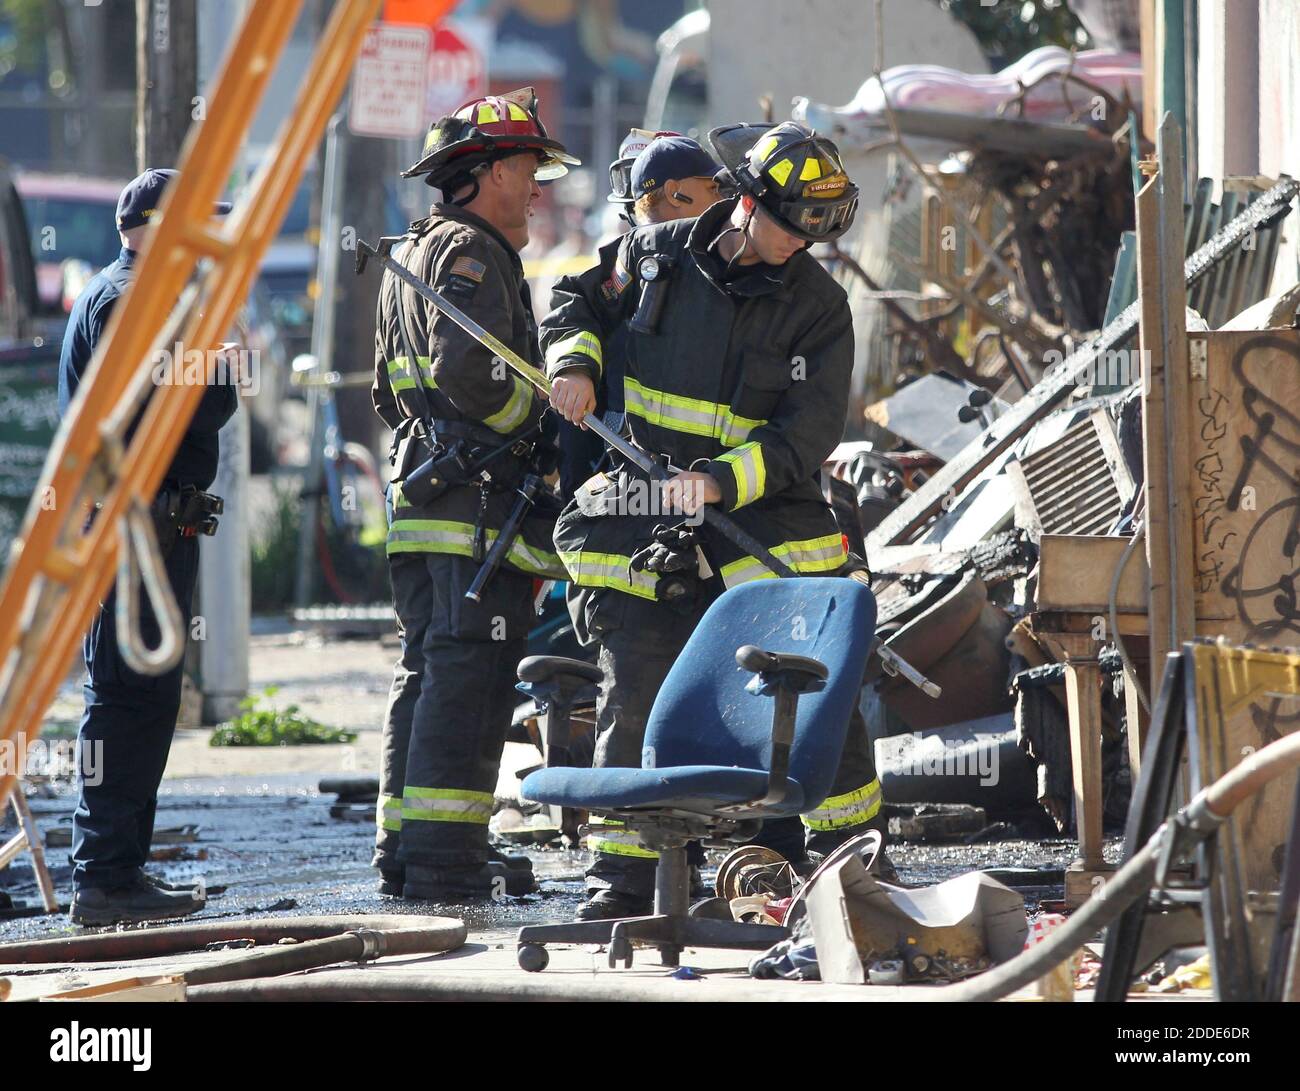 NO FILM, NO VIDEO, NO TV, NO DOCUMENTARY - Firefighters survey a fatal fire where at least nine people died in a warehouse party on 31st Avenue in Oakland, CA, USA, on Saturday, December 3, 2016. Photo by Anda Chu/Bay Area News Group/TNS/ABACAPRESS.COM Stock Photo